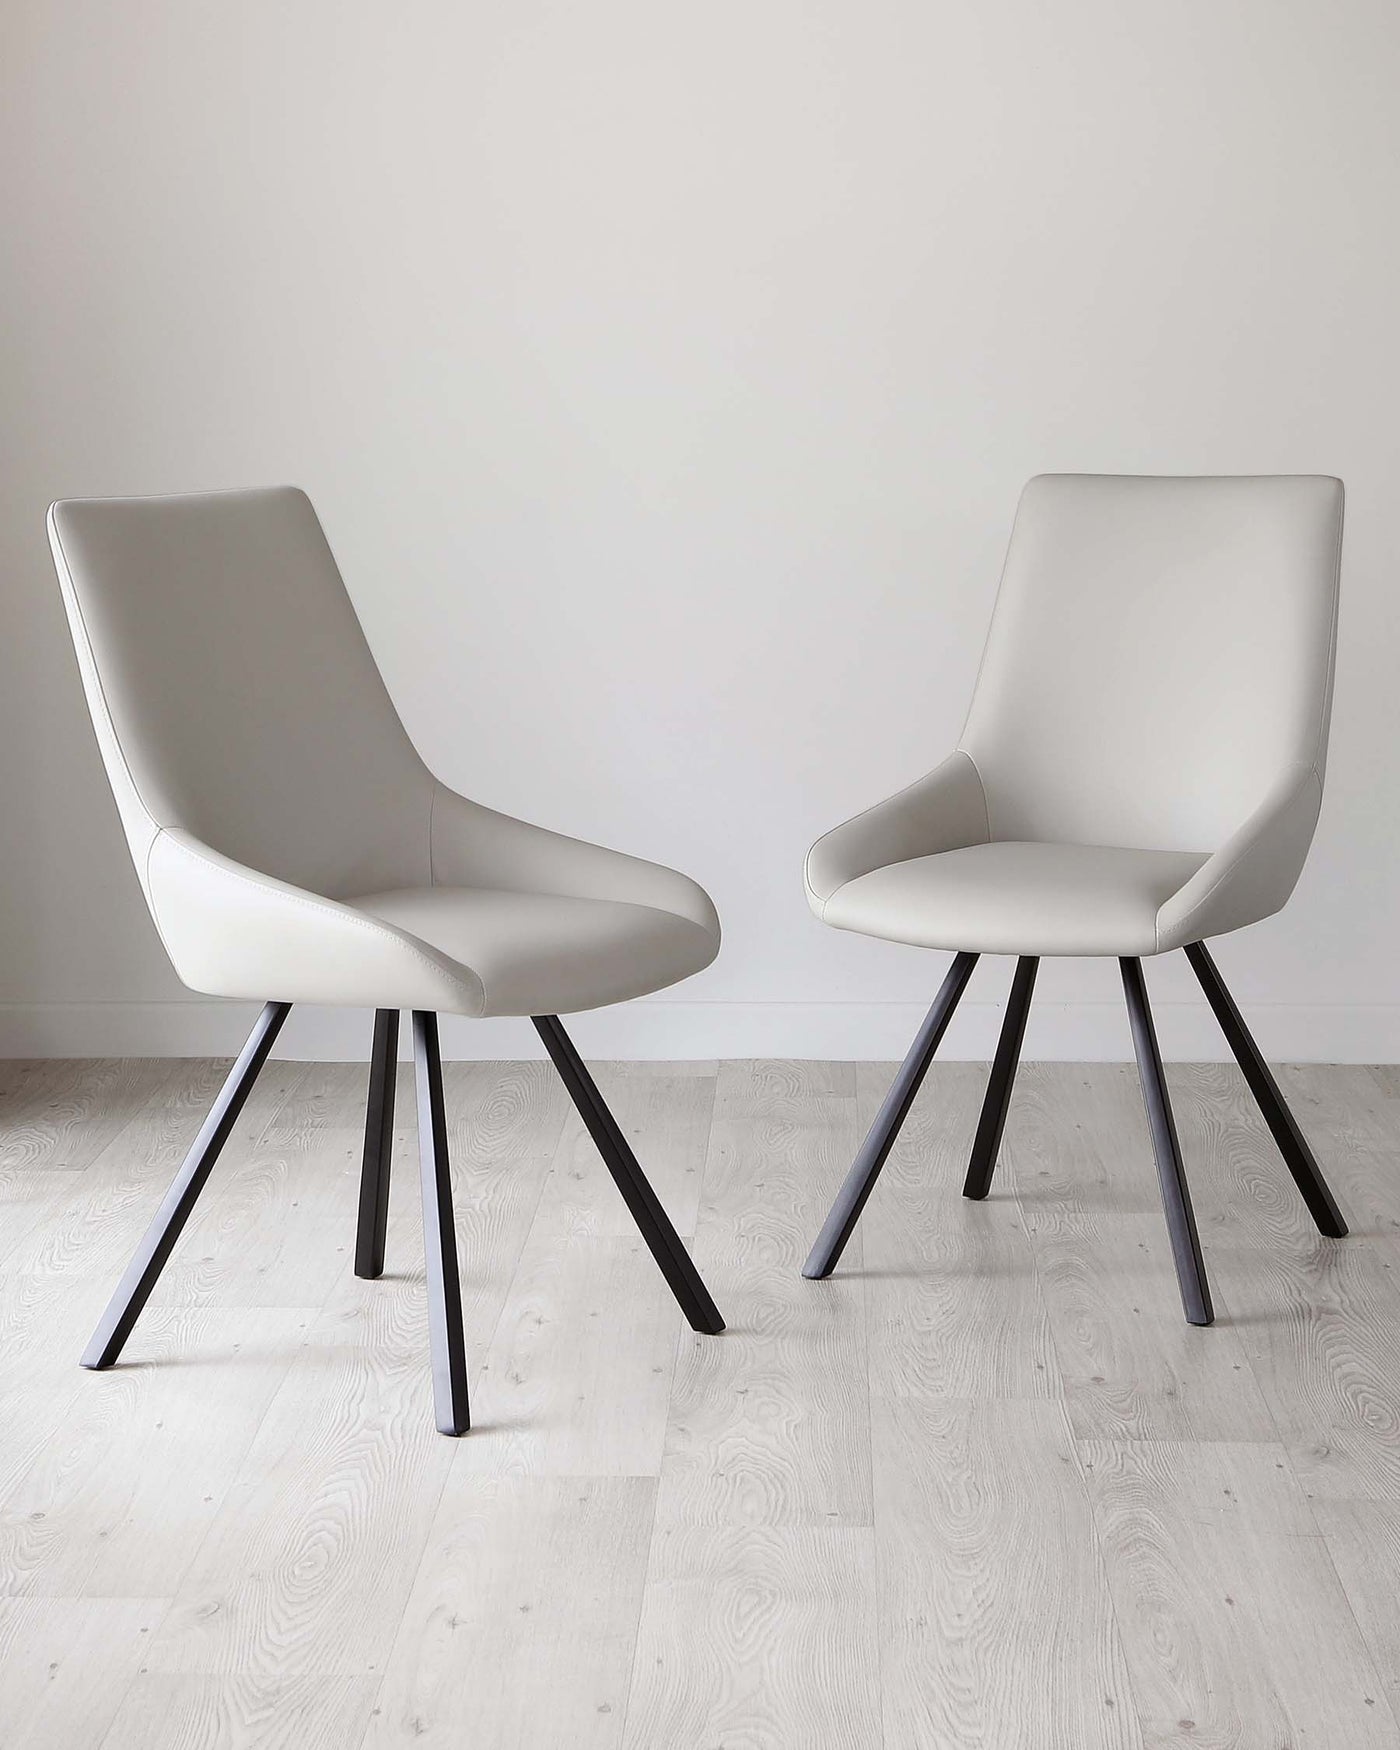 Theo Light Grey Faux Leather Dining Chair With Black Legs - Set of 2